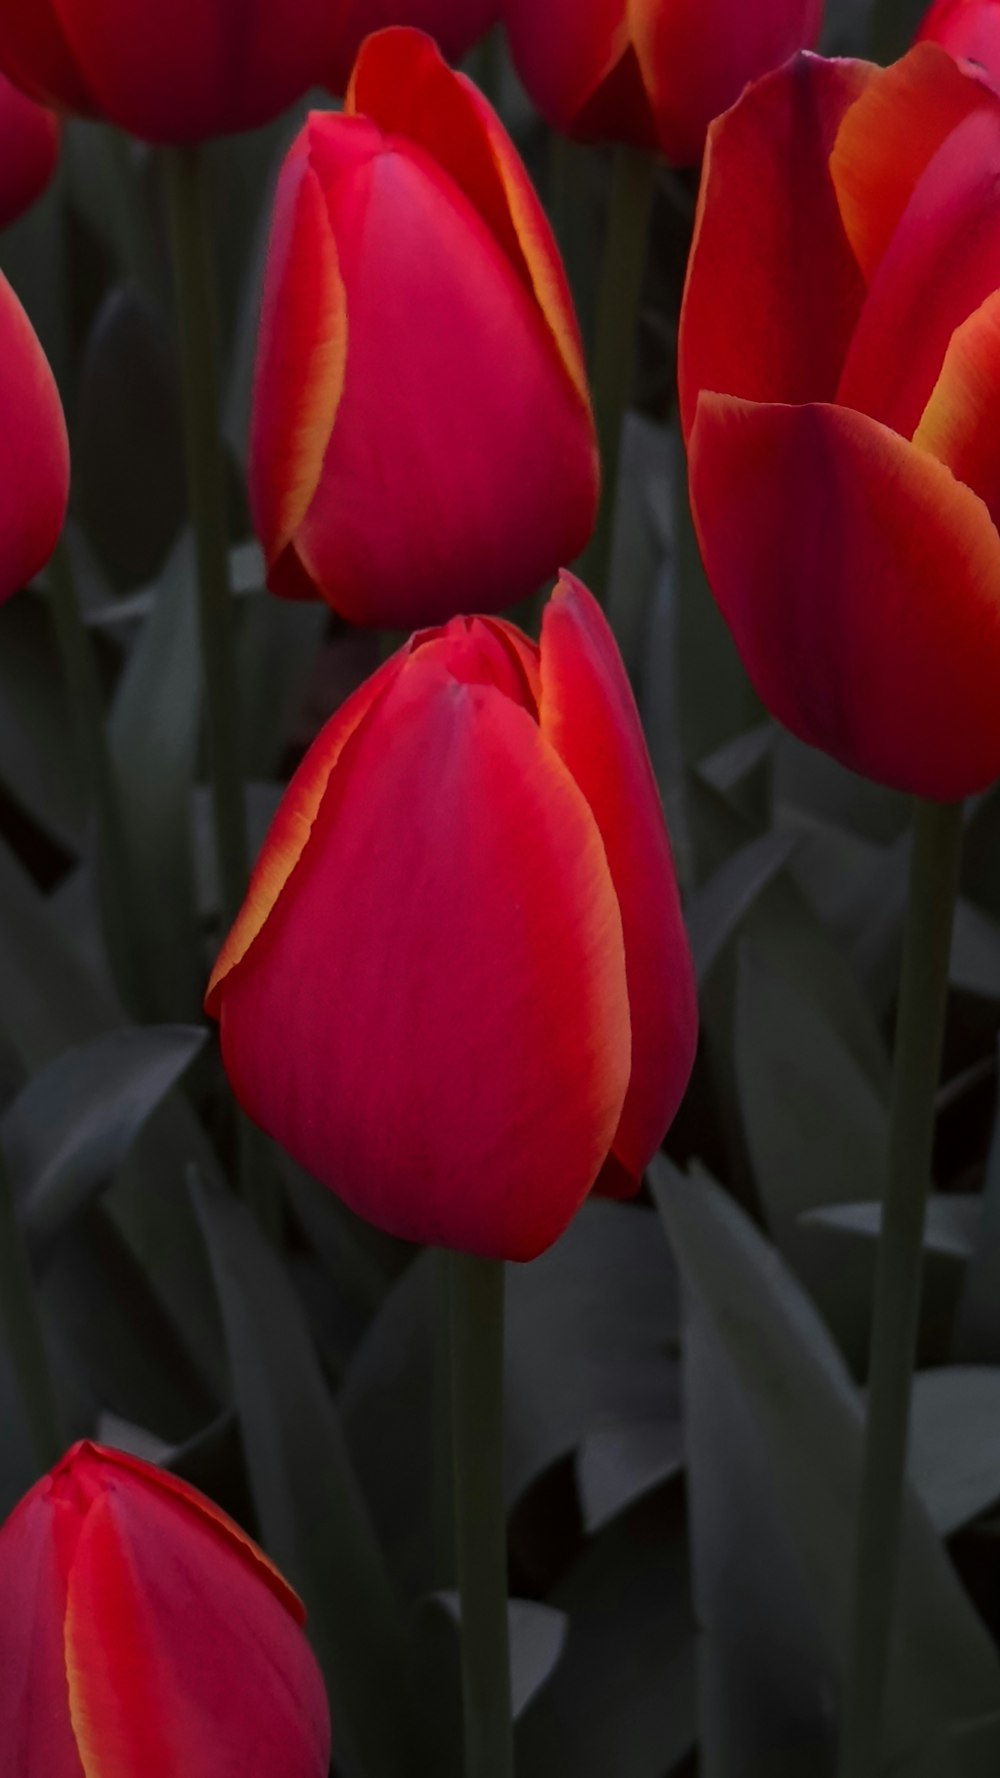 a group of red tulips with green leaves